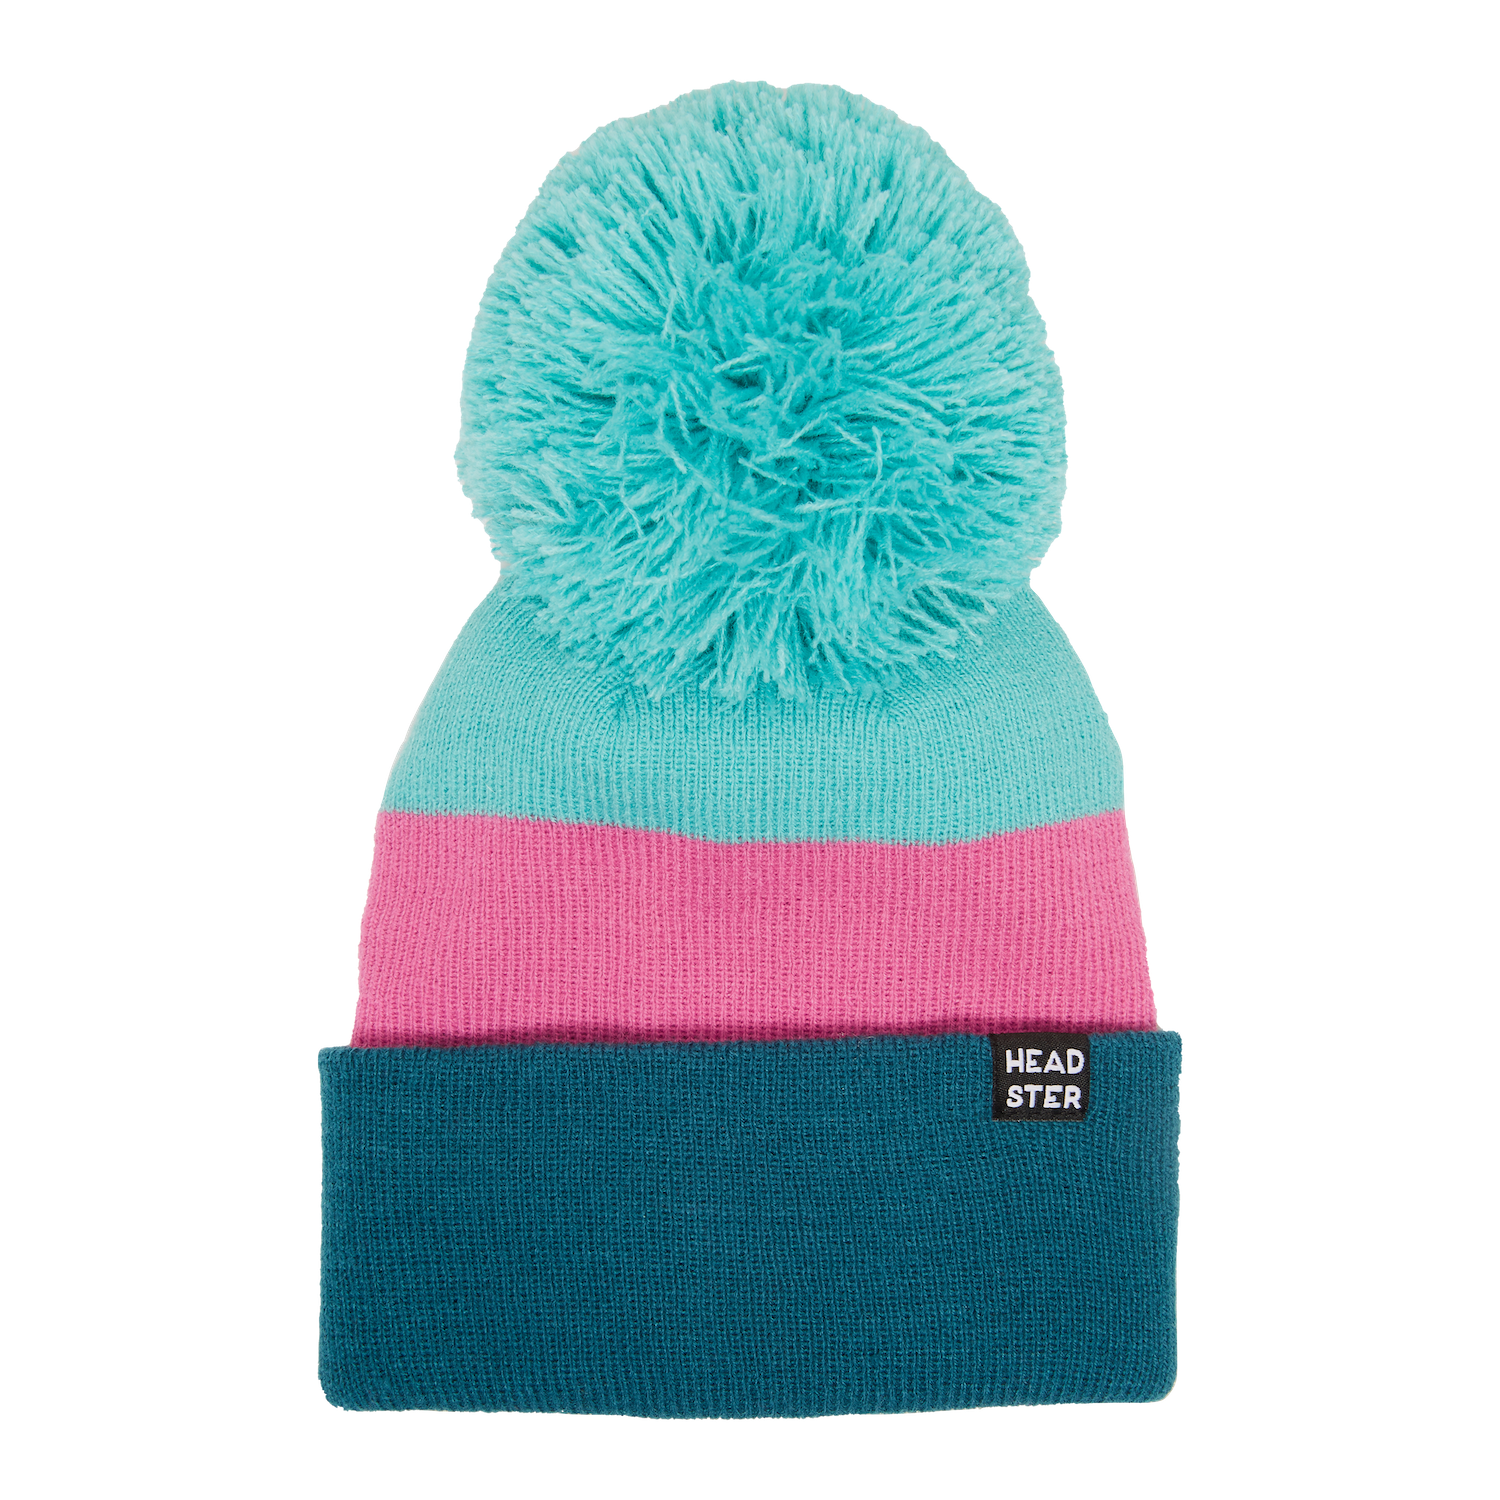 TRICOLOR, GARCON,BEANIE, FILLE, TUQUE, TUQUES, HEADSTER KIDS